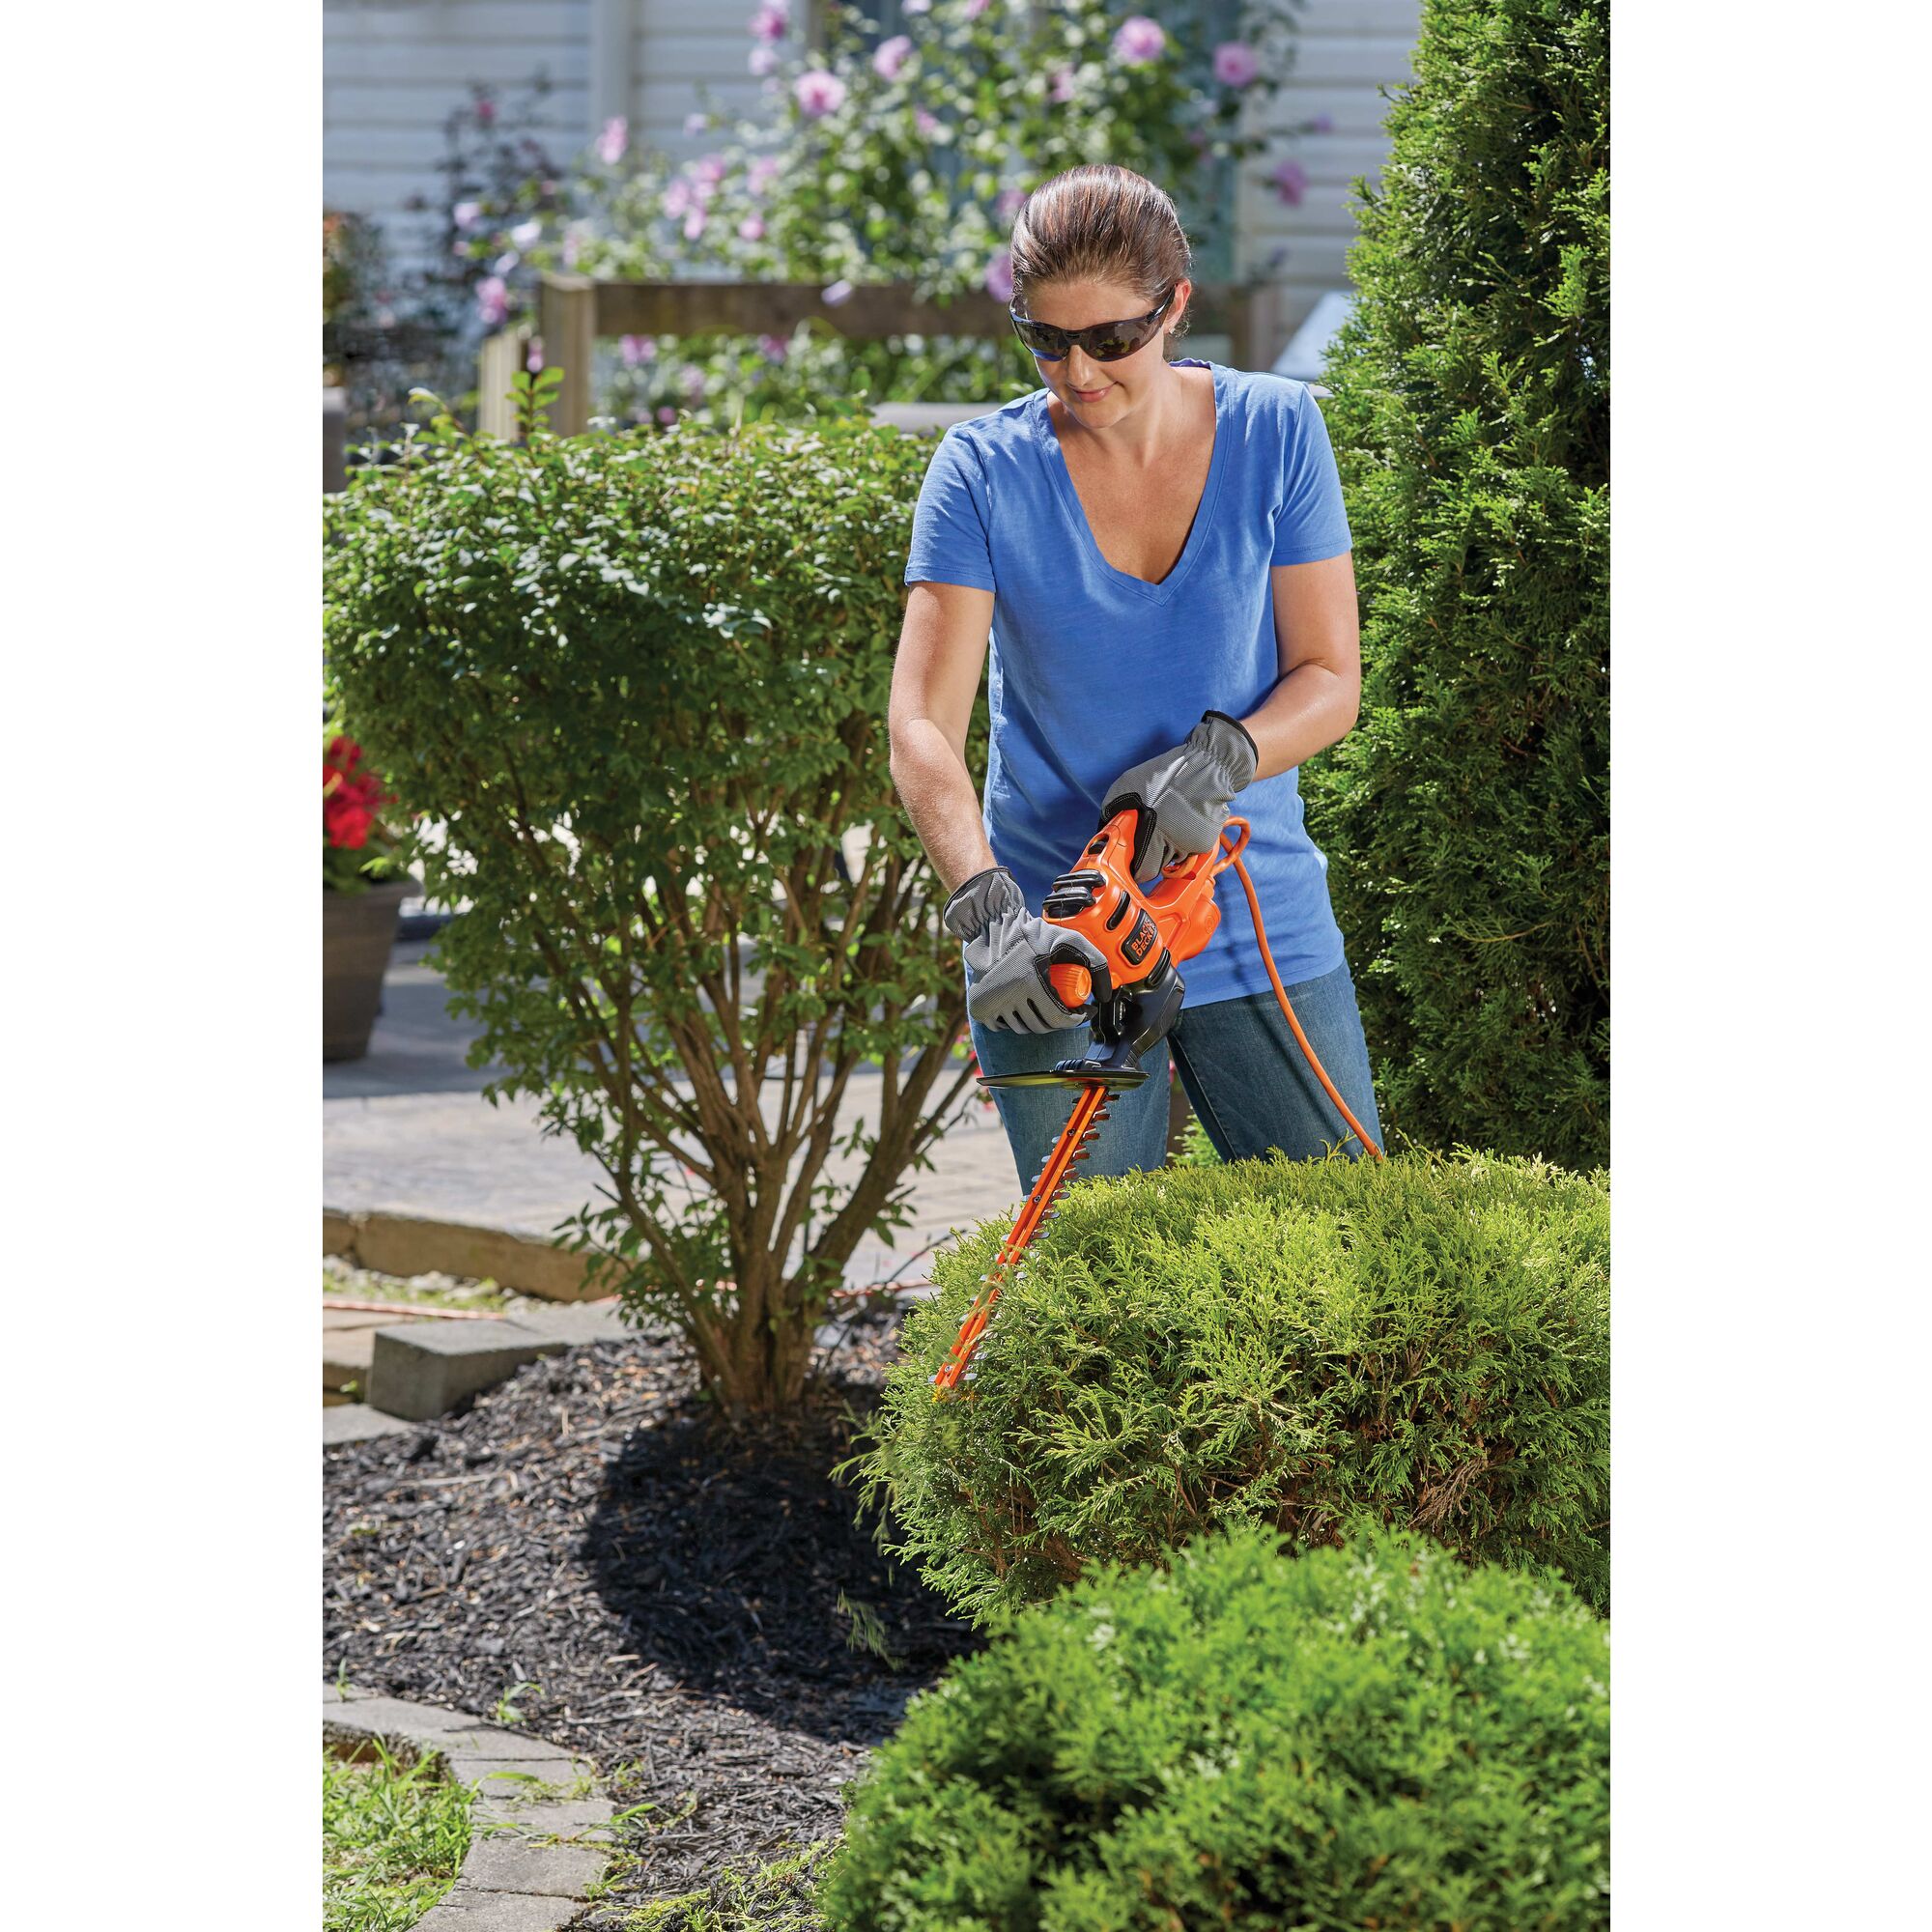 16 inch Electric hedge trimmer being used by a person to trim bushes.